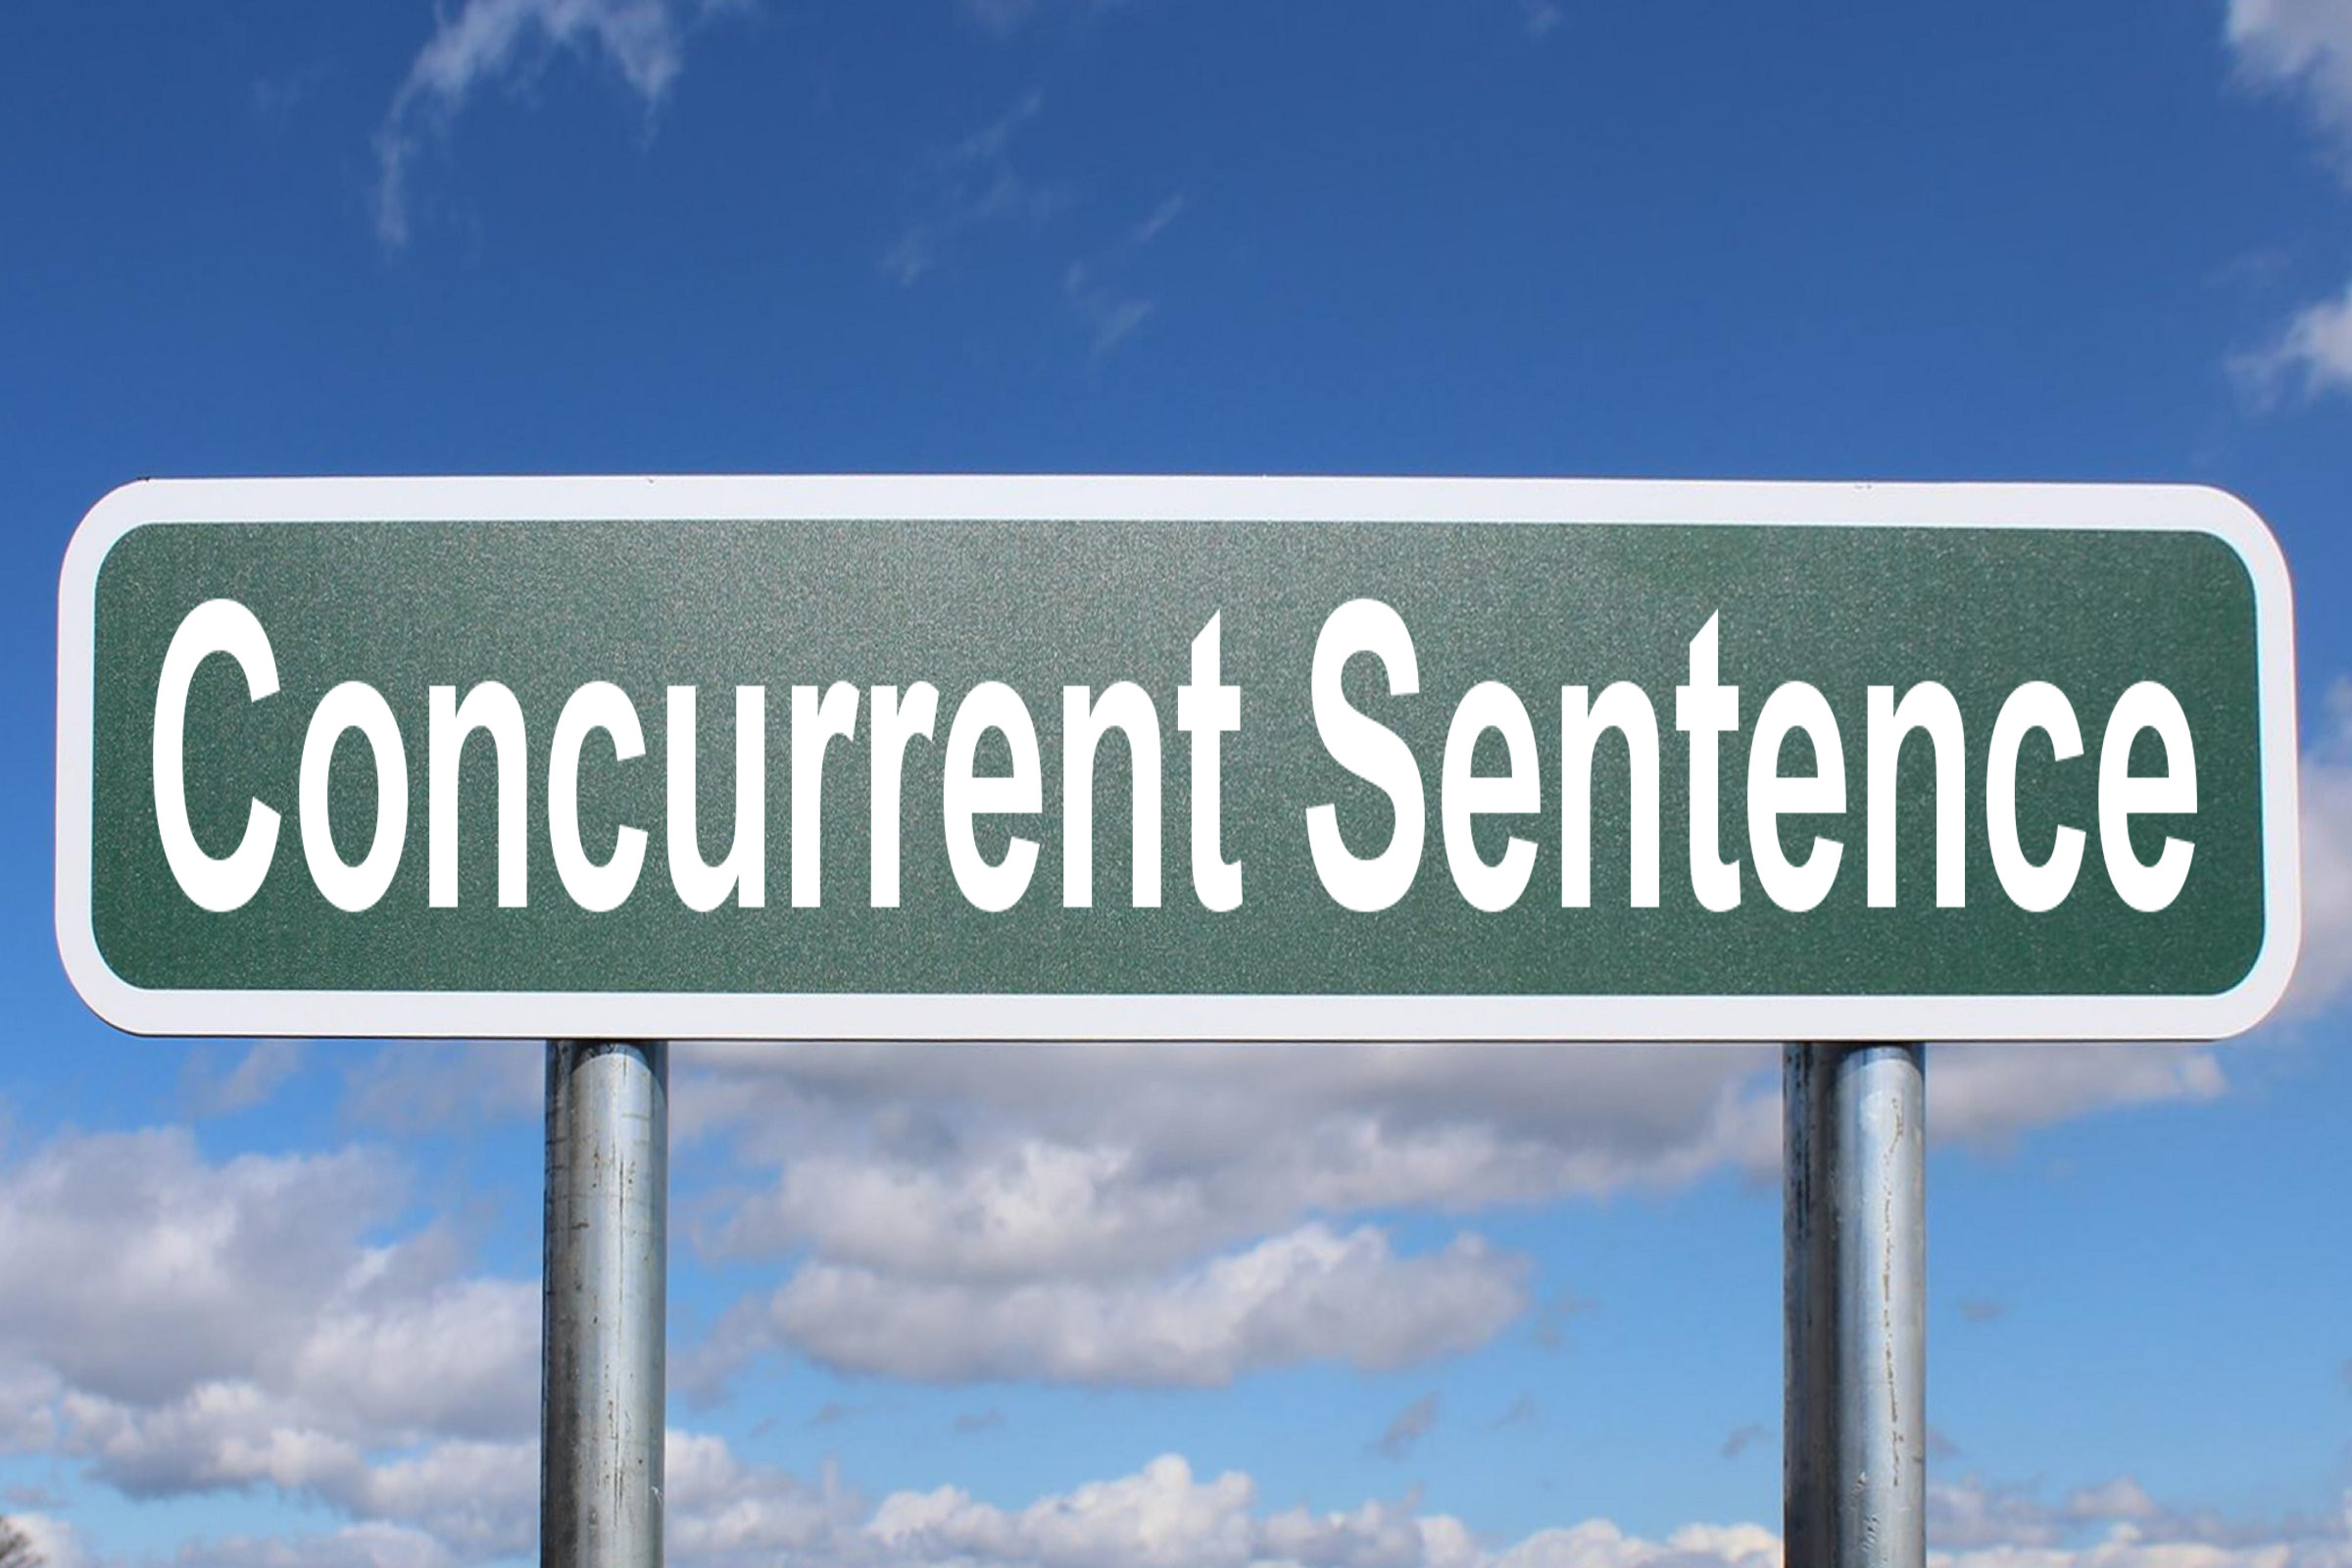 free-of-charge-creative-commons-concurrent-sentence-image-highway-signs-3